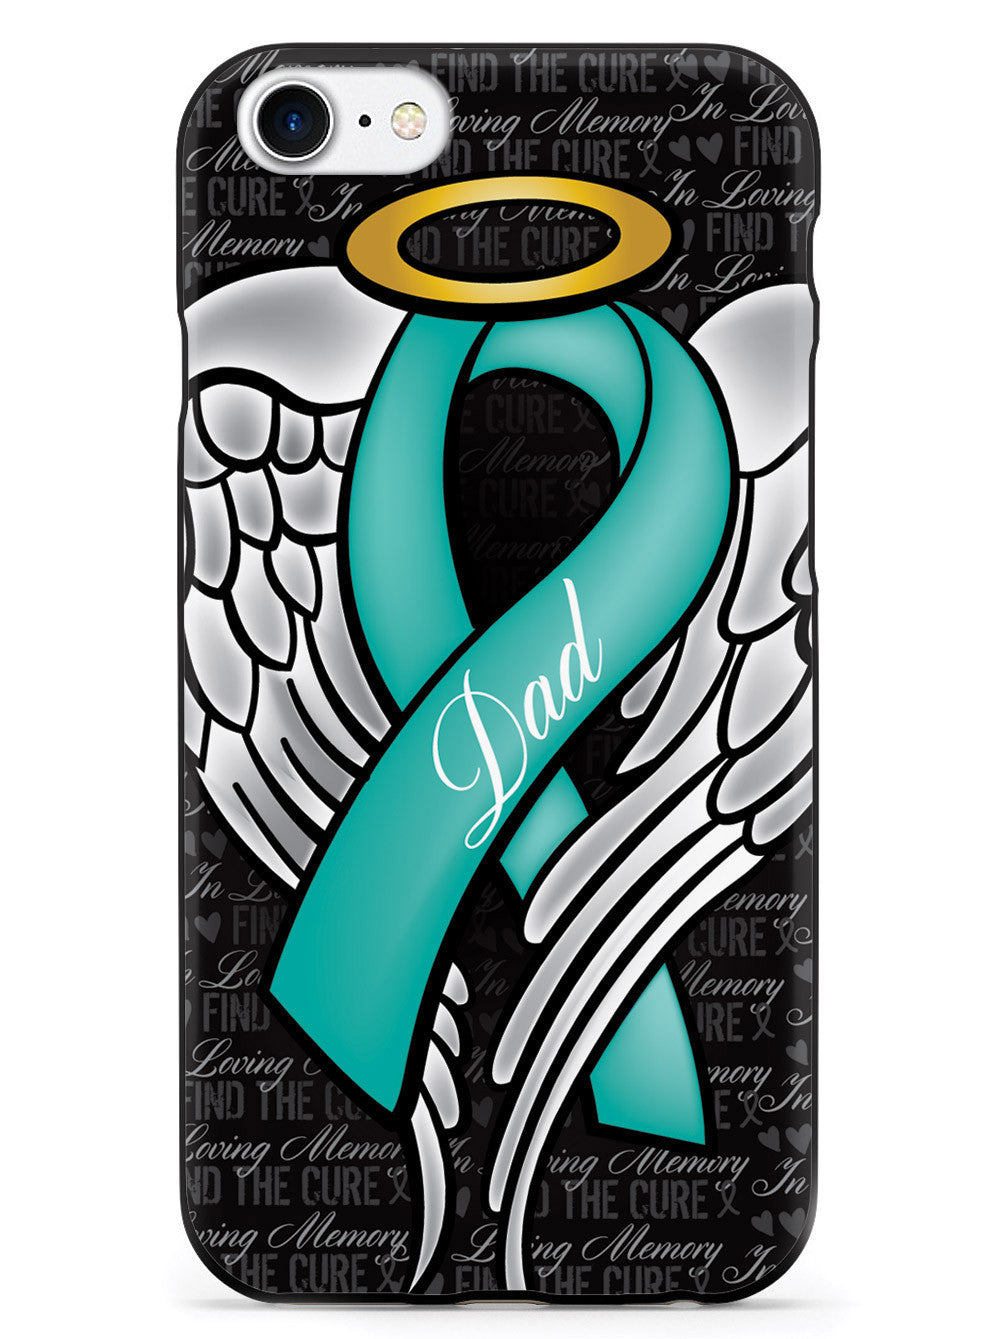 In Loving Memory of My Dad - Teal Ribbon Case